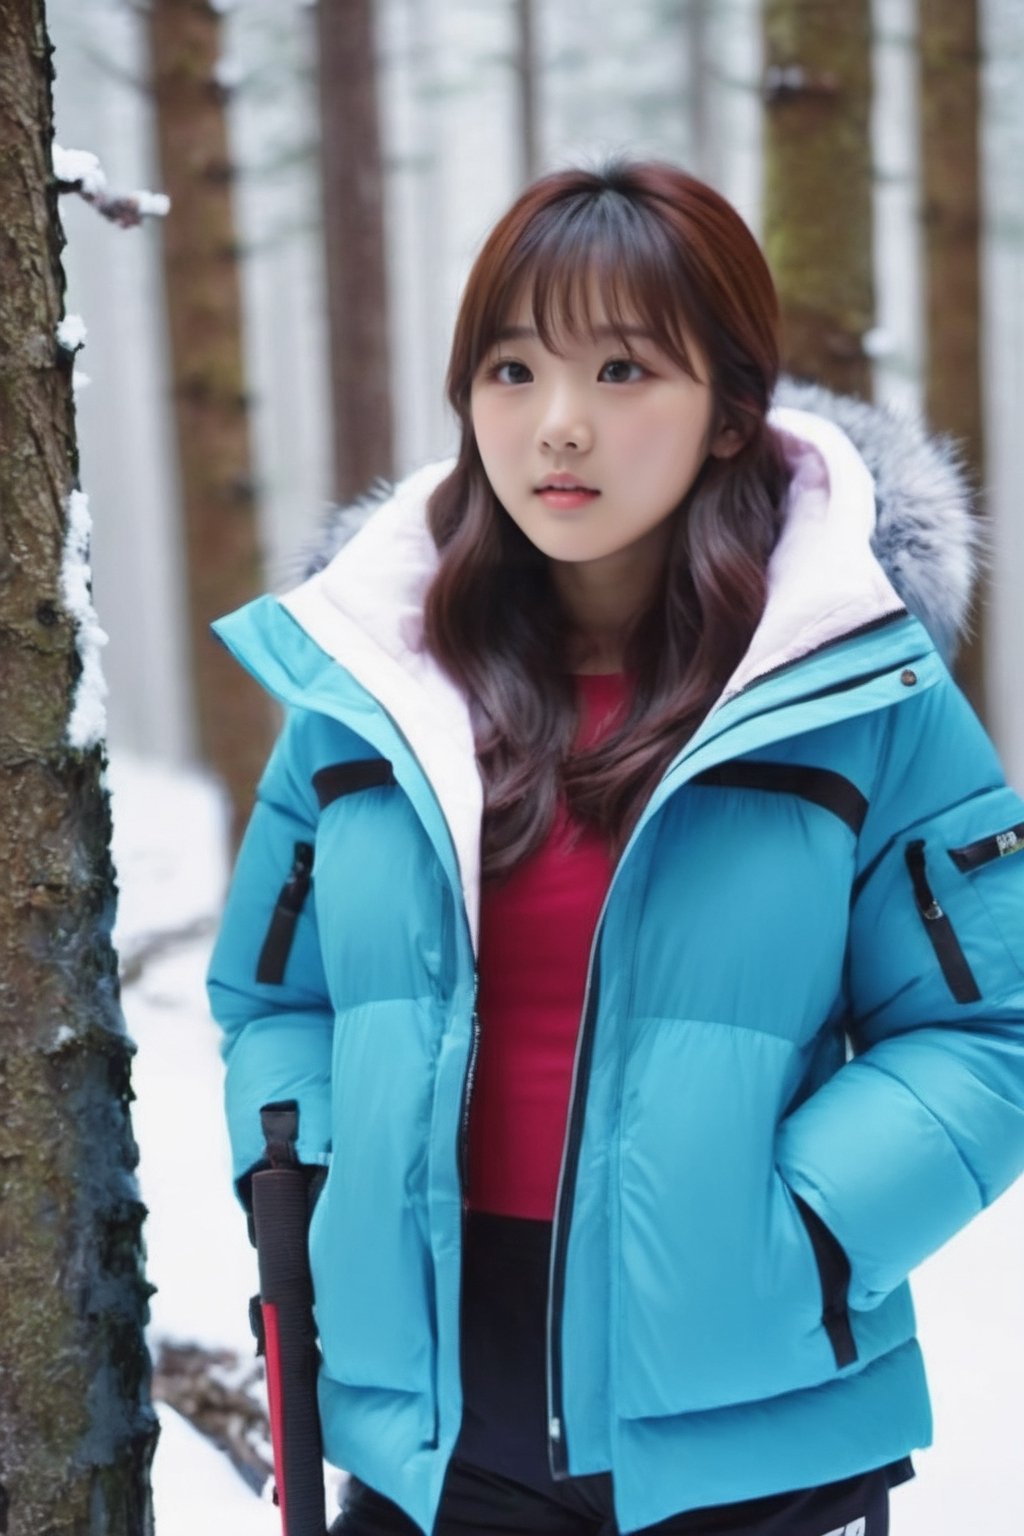 (((In the winter mountain forest with heavy snow))),(looking at the audience),
人物：(((a korean young girl))),
頭髮：(bangs),(long hair),
服飾：(Fully zipped down jacket), (Sports shorts), (Snow boots),